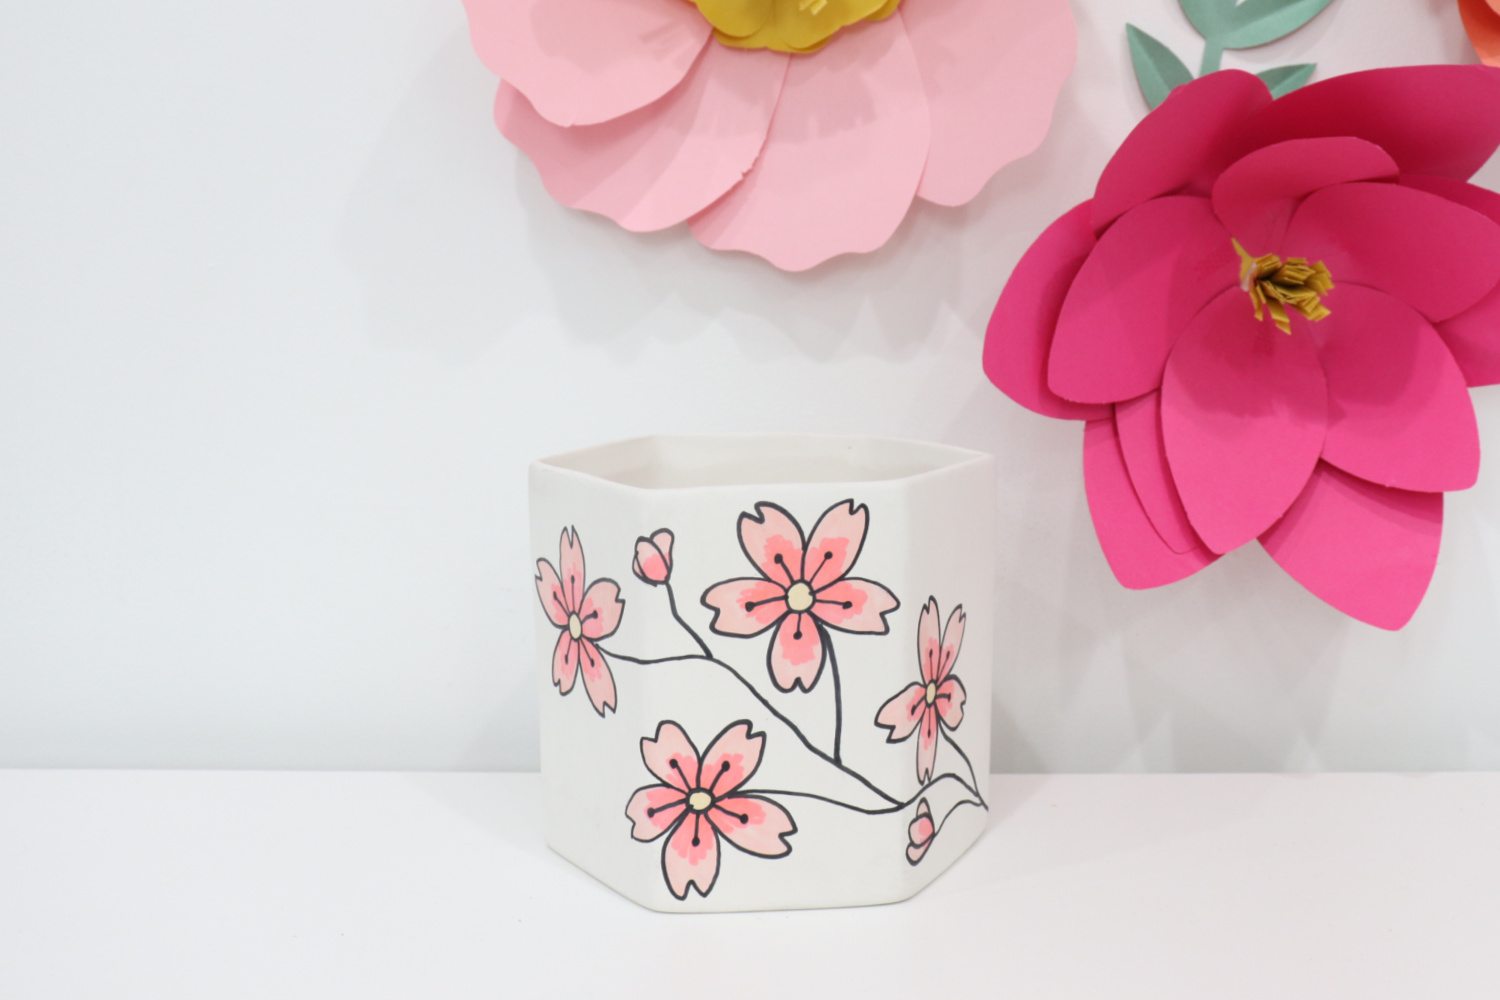 Image contains the finished cherry blossom planter sitting on a white shelf. Large light and dark. pink paper flowers hang on the wall nearby.